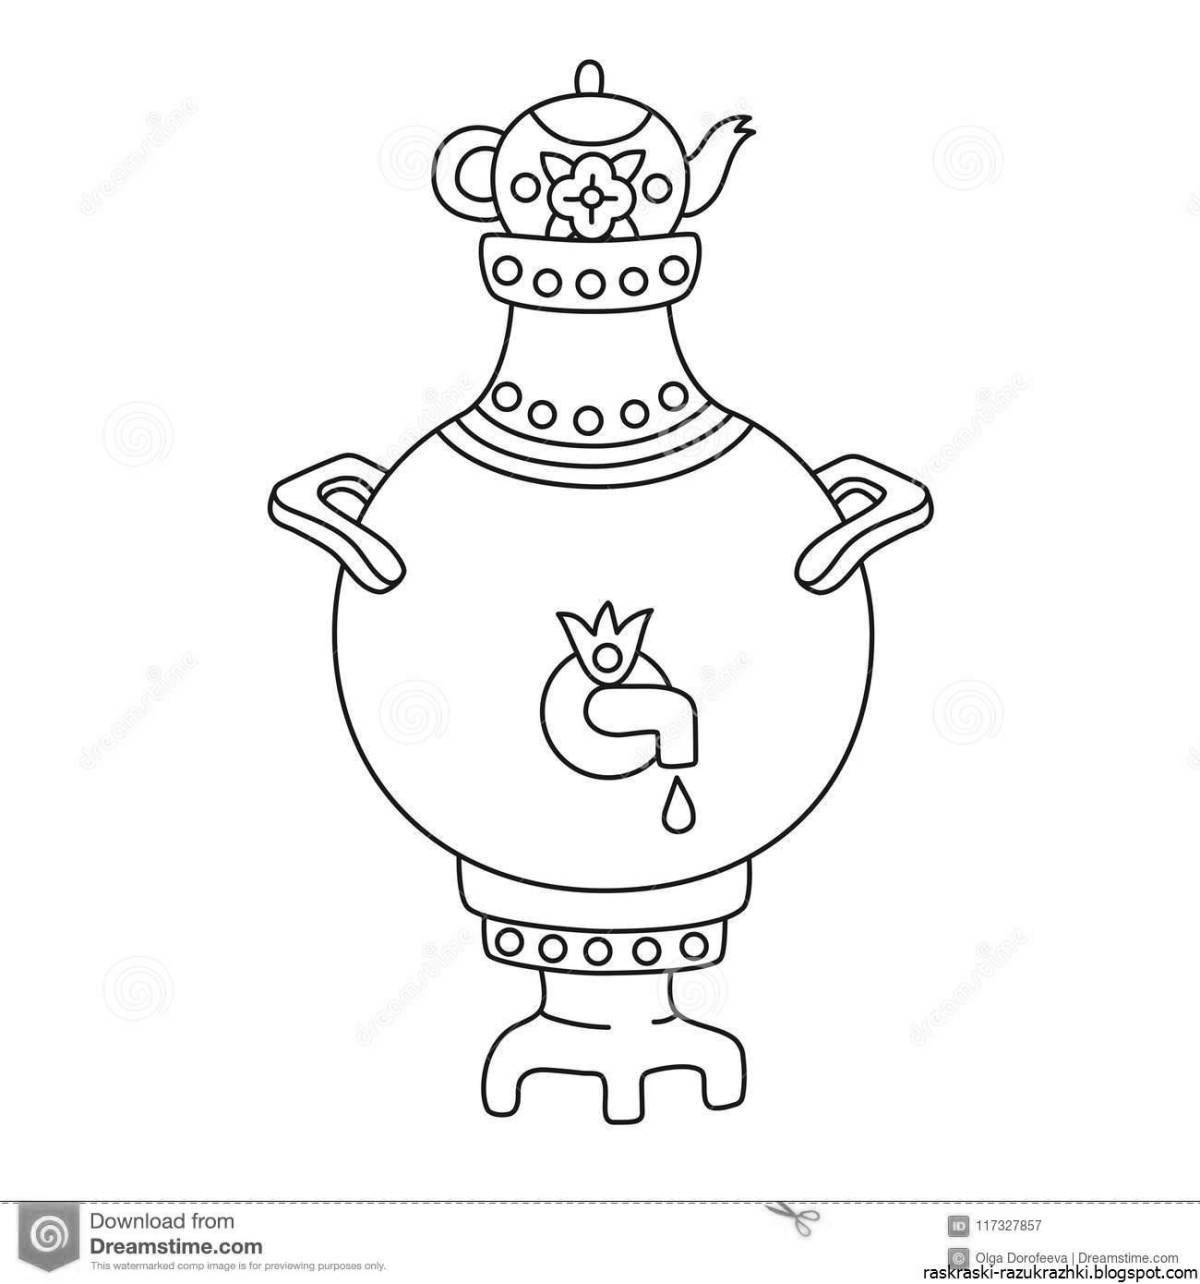 Coloring page luxury carnival samovar